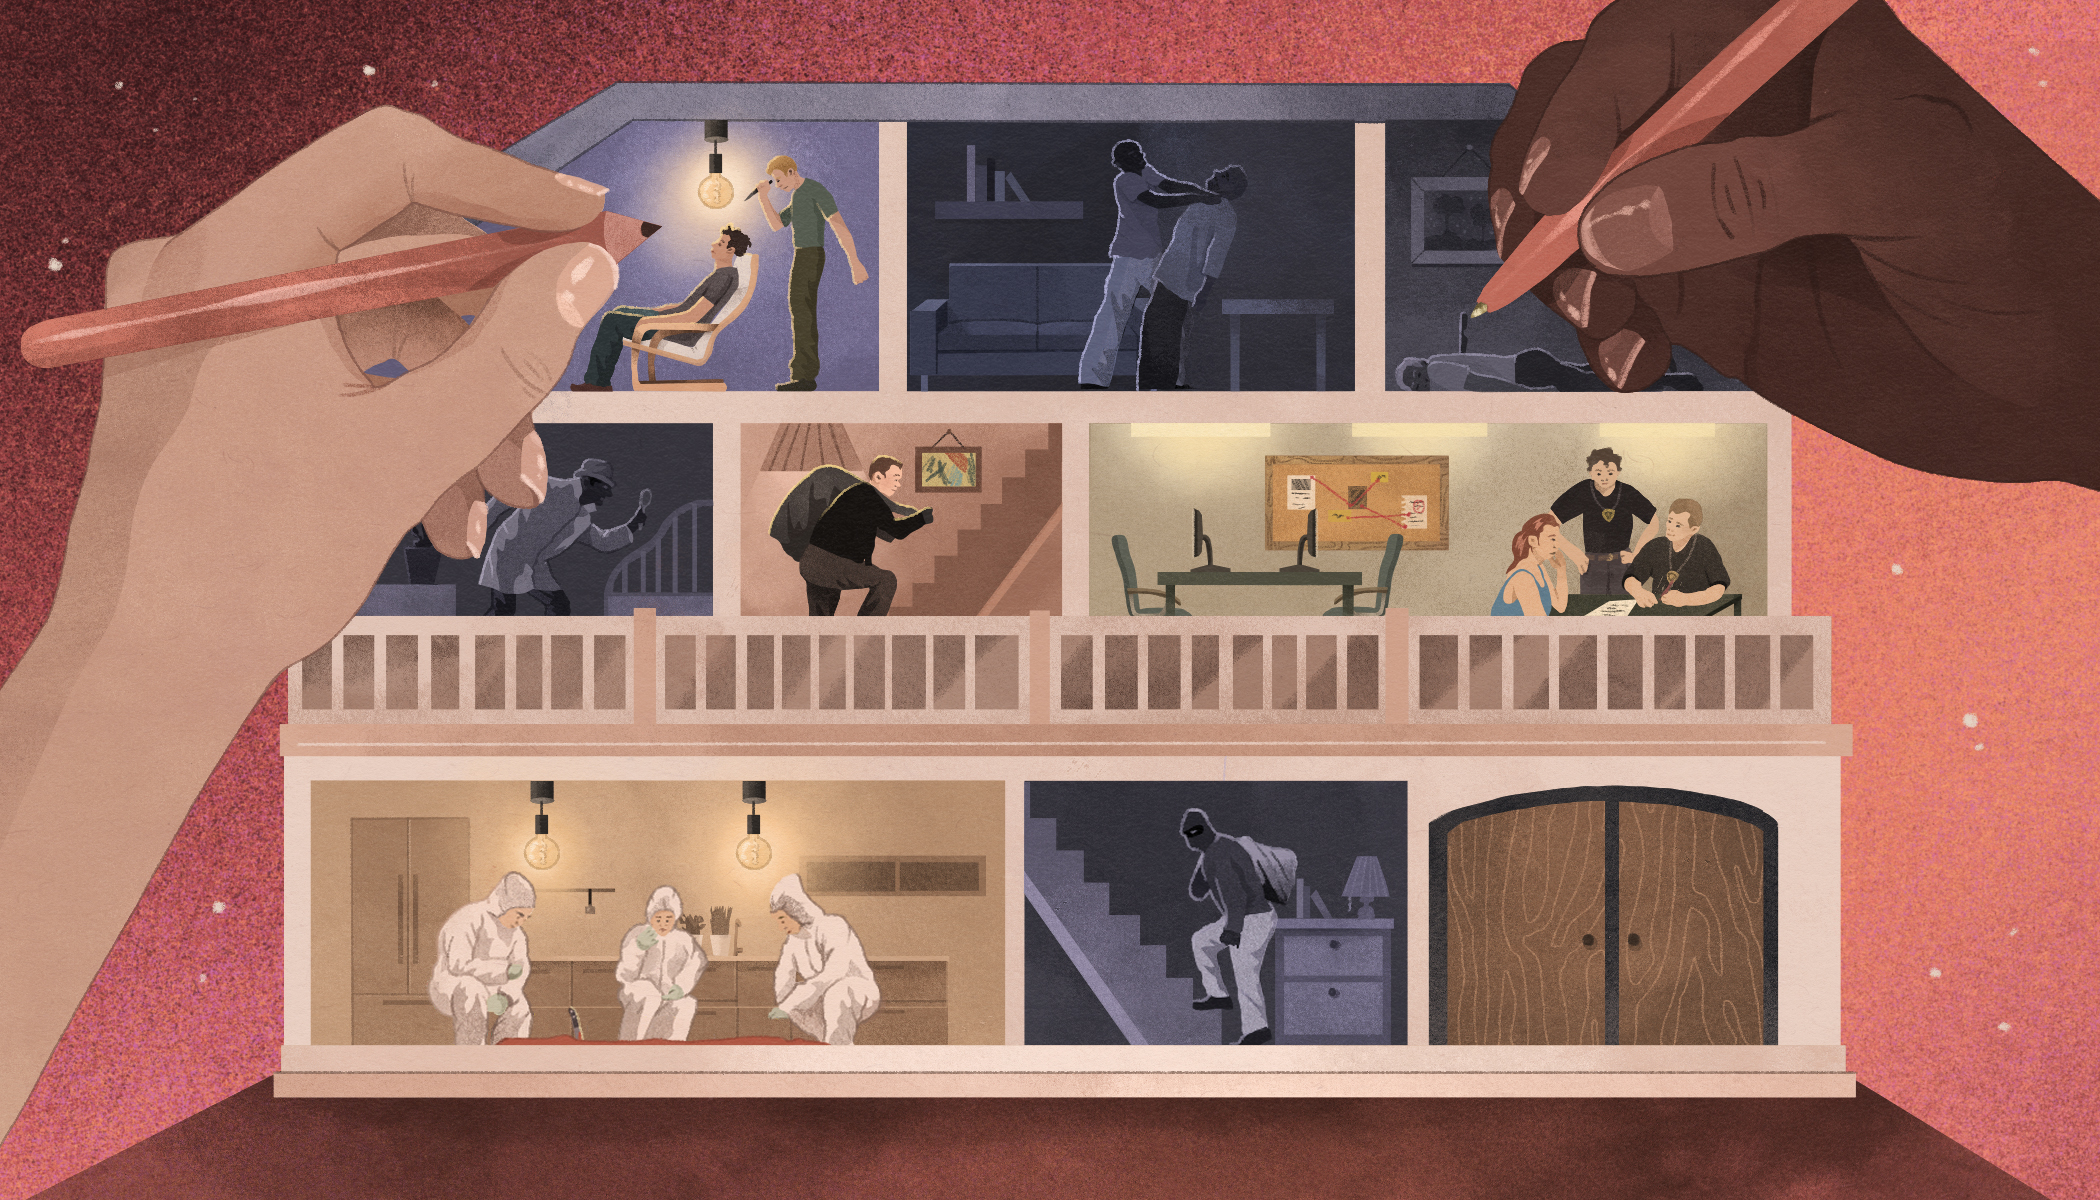 'Readers visiting from Mars would assume that only white folks were murdered, solved crimes, righted wrongs,' writes Rachel Howzell Hall (Illustration by Michelle Urra for TIME)